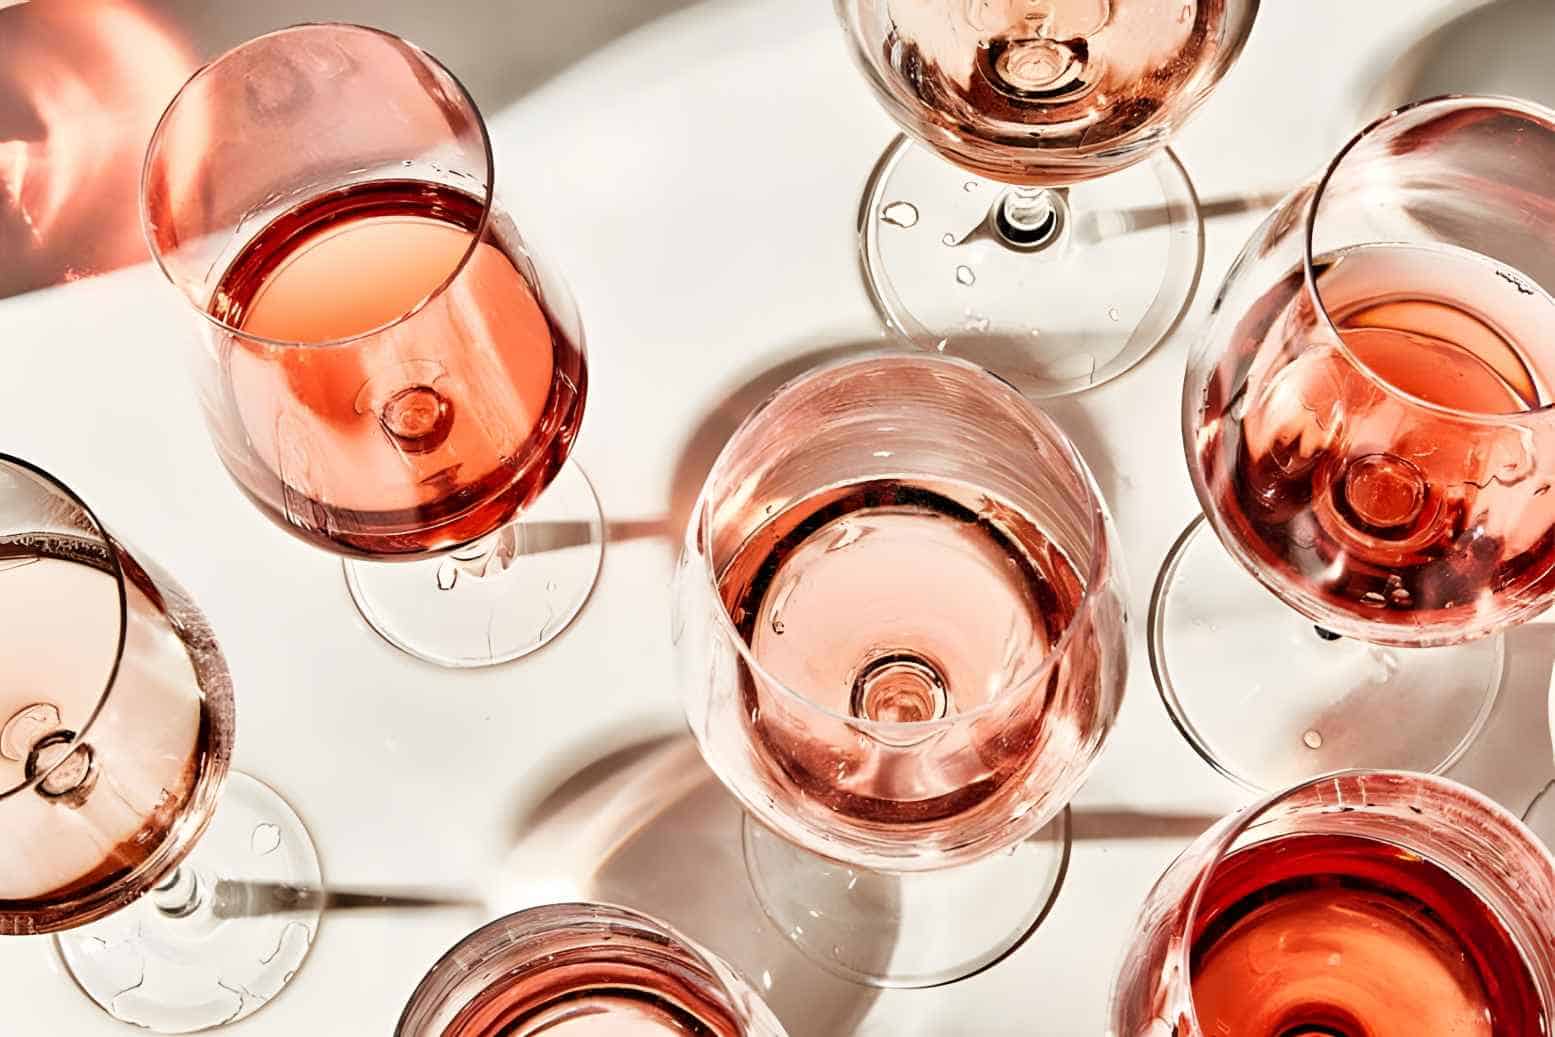 White Zinfandel Wines You Should Try